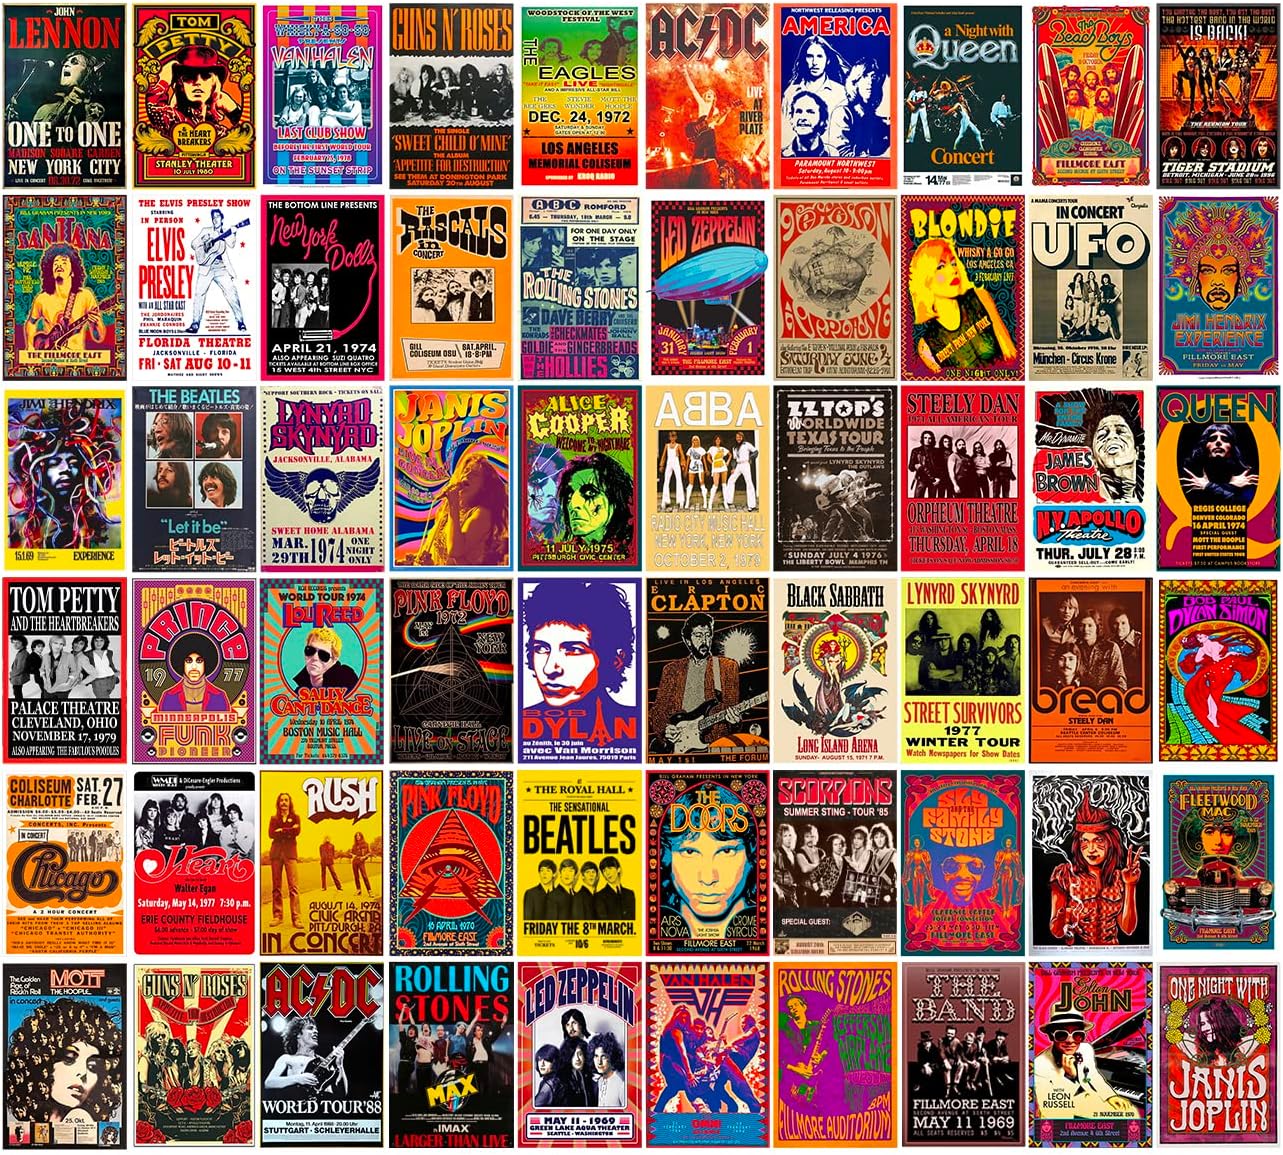 Woonkit 60 PC Vintage Rock Band Posters for Room Aesthetic, 70s 80s 90s Retro Music Room, Bedroom Decor Wall Art, Music Concert Poster Wall Collage, Old Music Album Cover Prints (A 60 SET, 4X6 INCH)